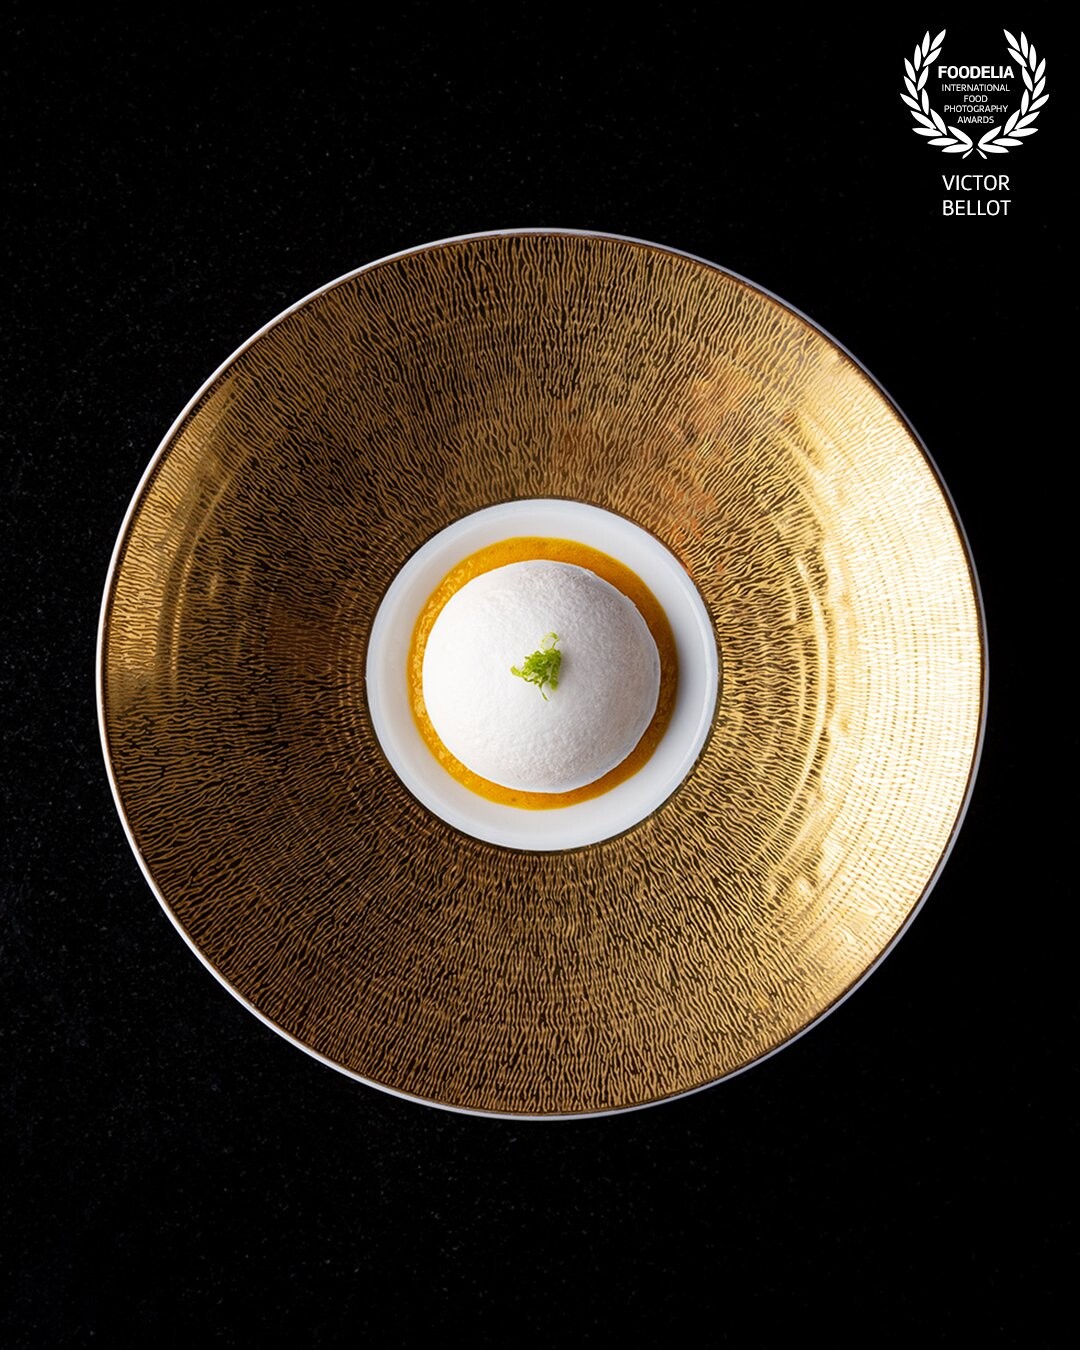 This photo highlights the purity of Joël Robuchon's Atelier Saint-Germain dessert. The purpose of this image is to highlight the millimetric dressing of a michelin star as well as the magnificent golden crockery.